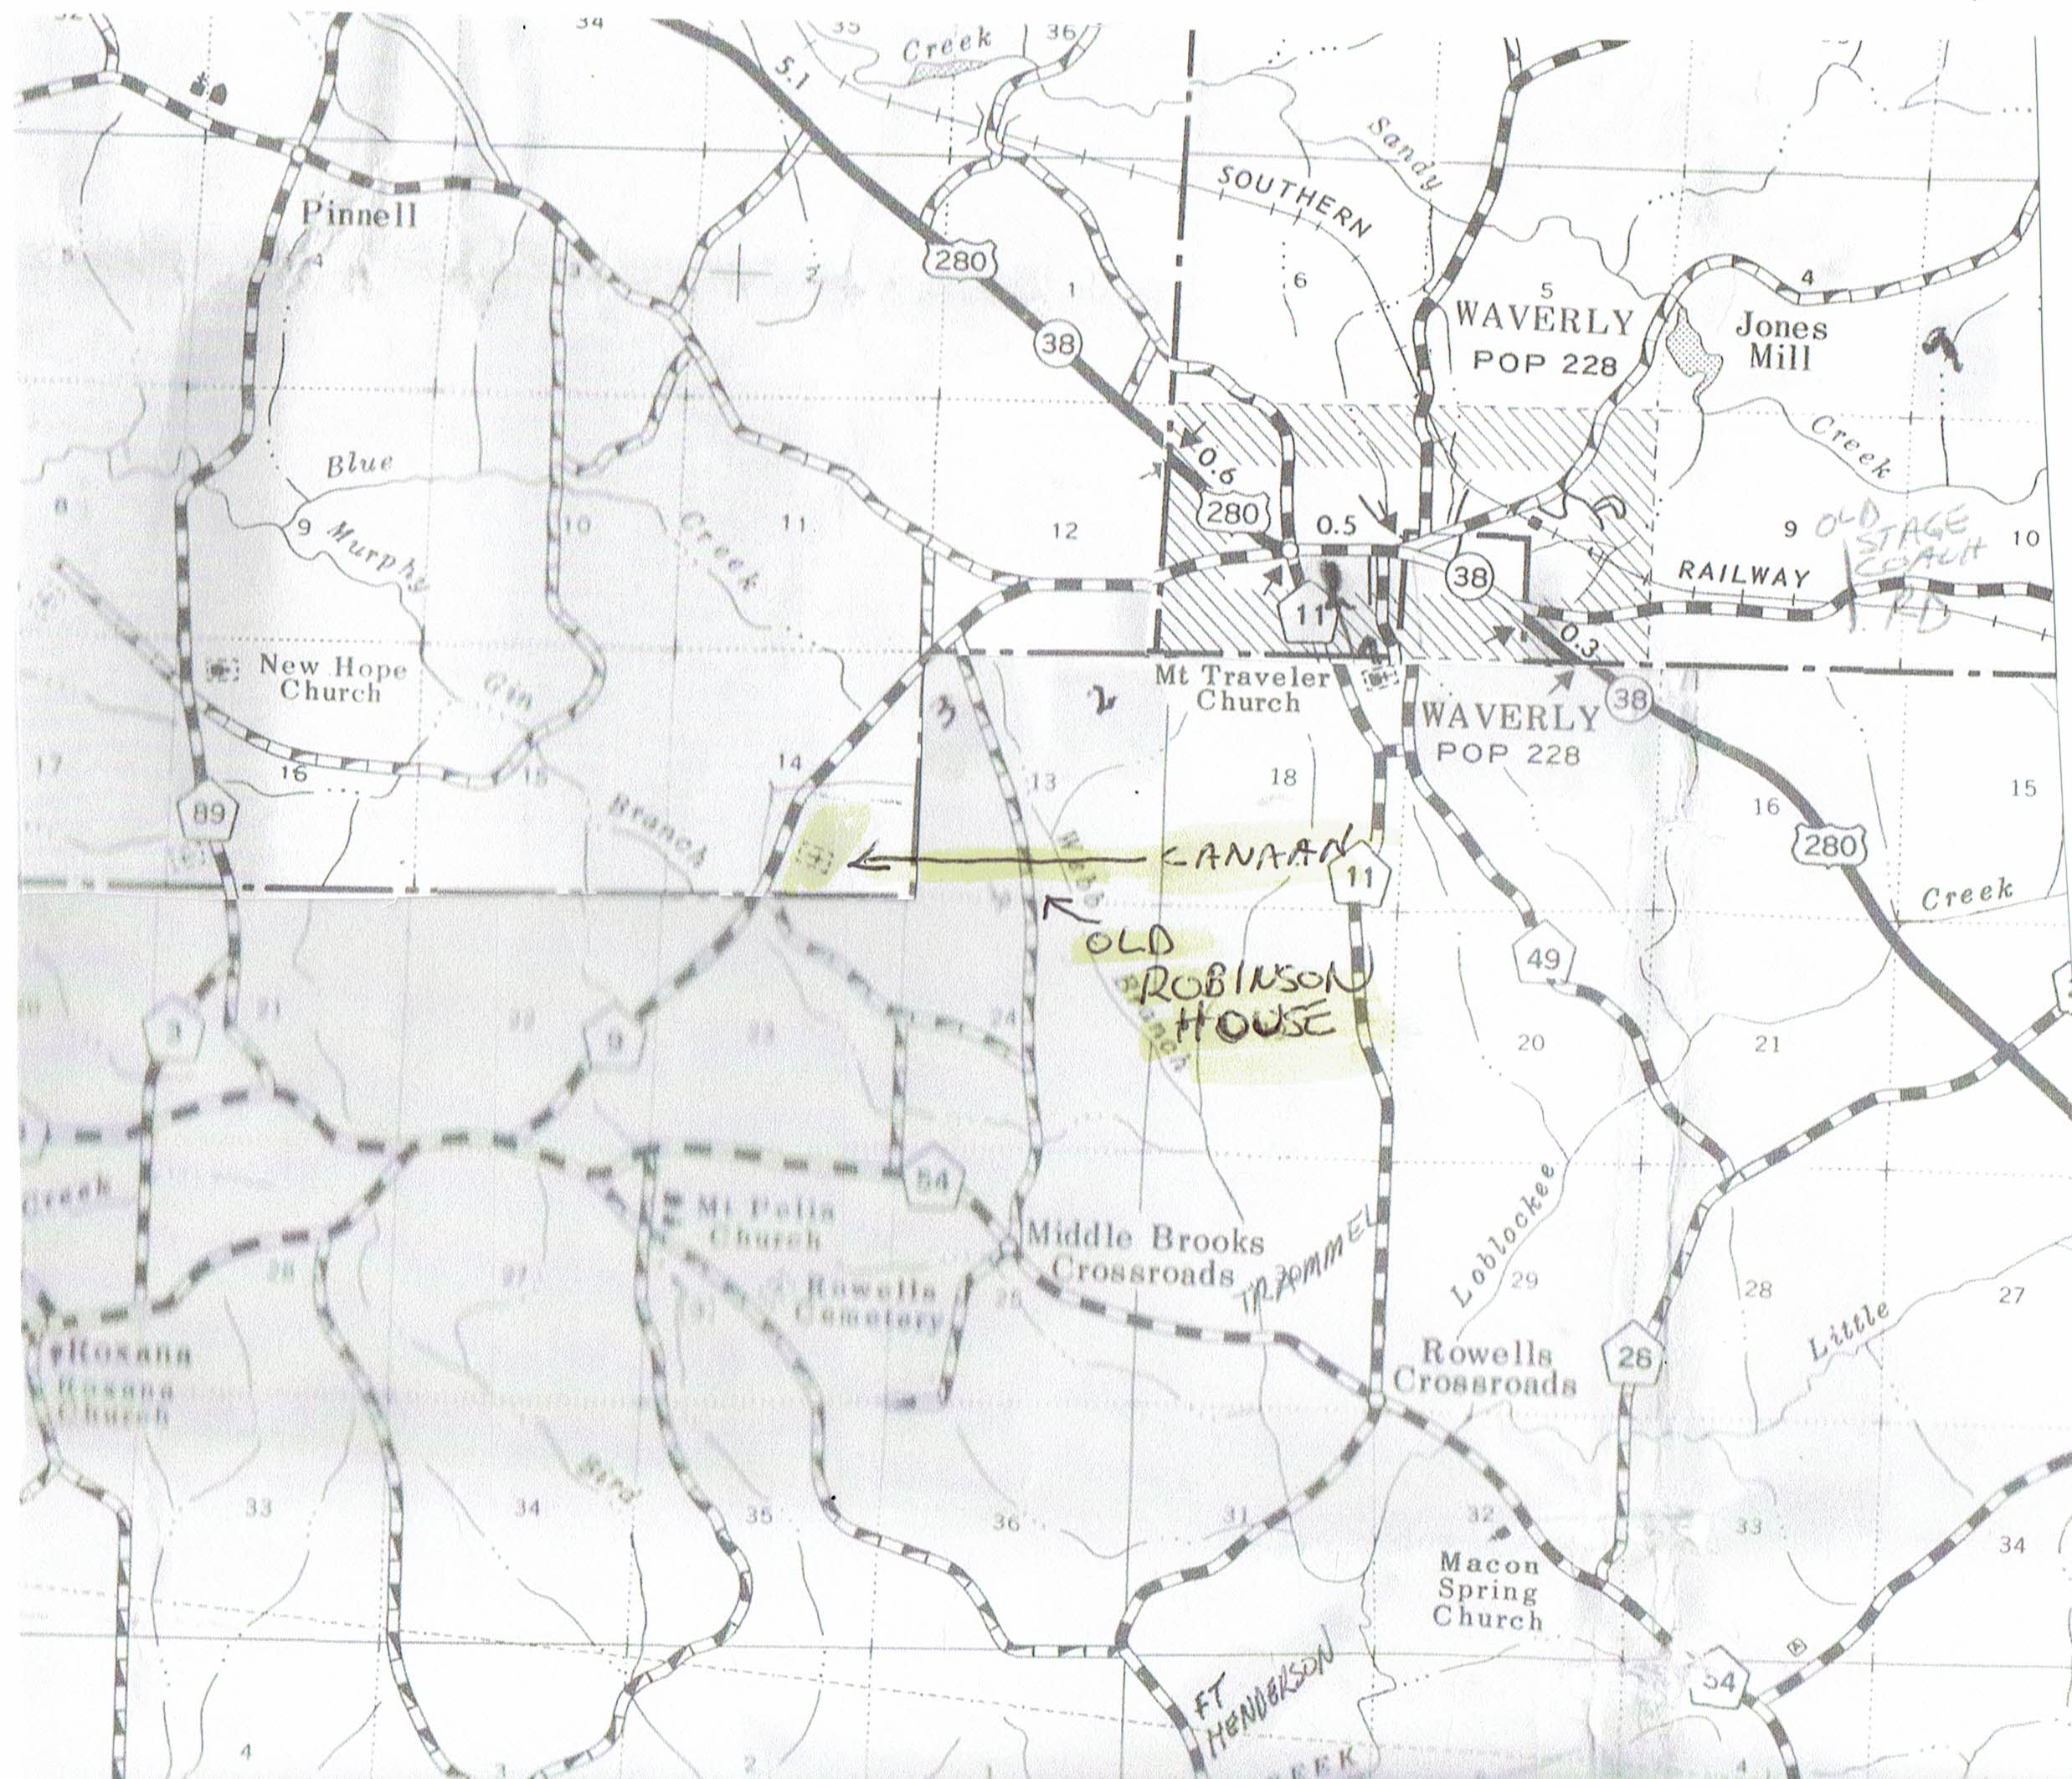 Map of Canaan Cemetery and old Robinson house